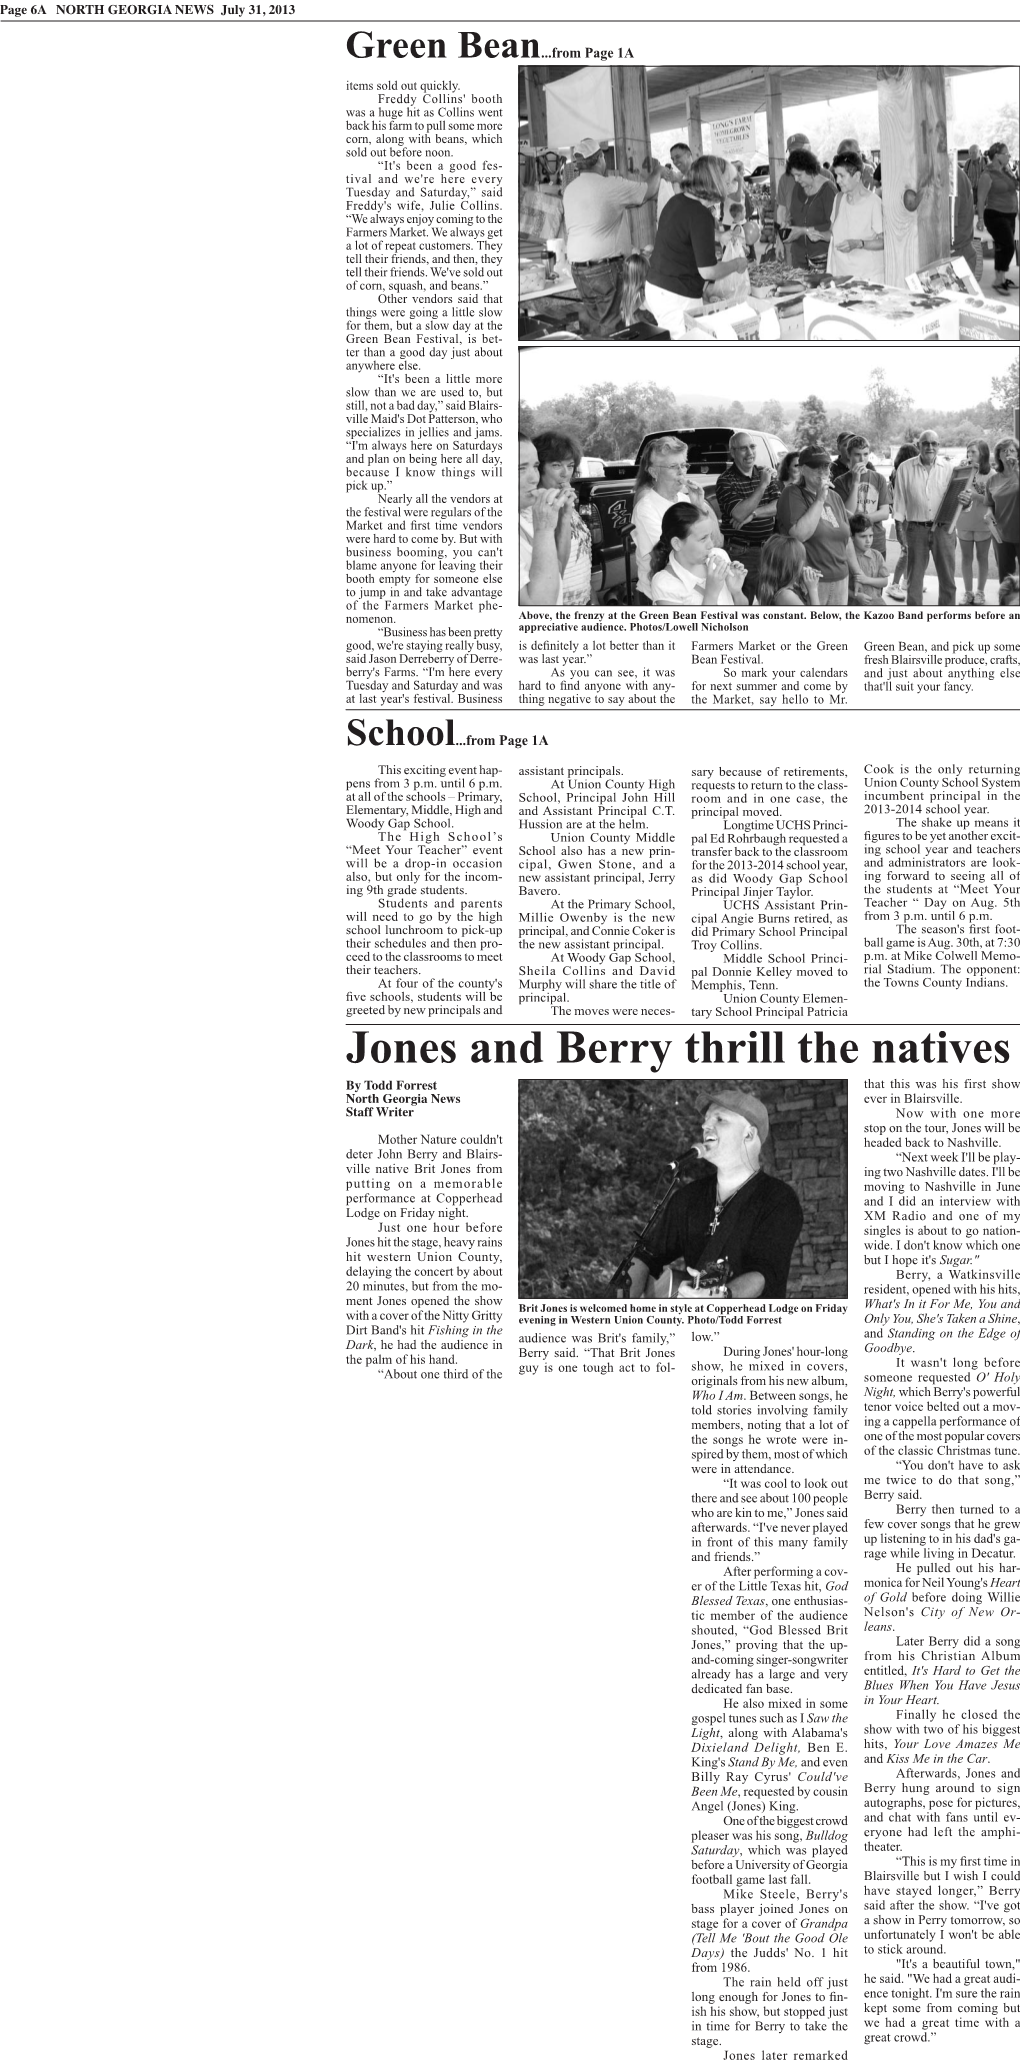 Jones and Berry Thrill the Natives by Todd Forrest That This Was His First Show North Georgia News Ever in Blairsville